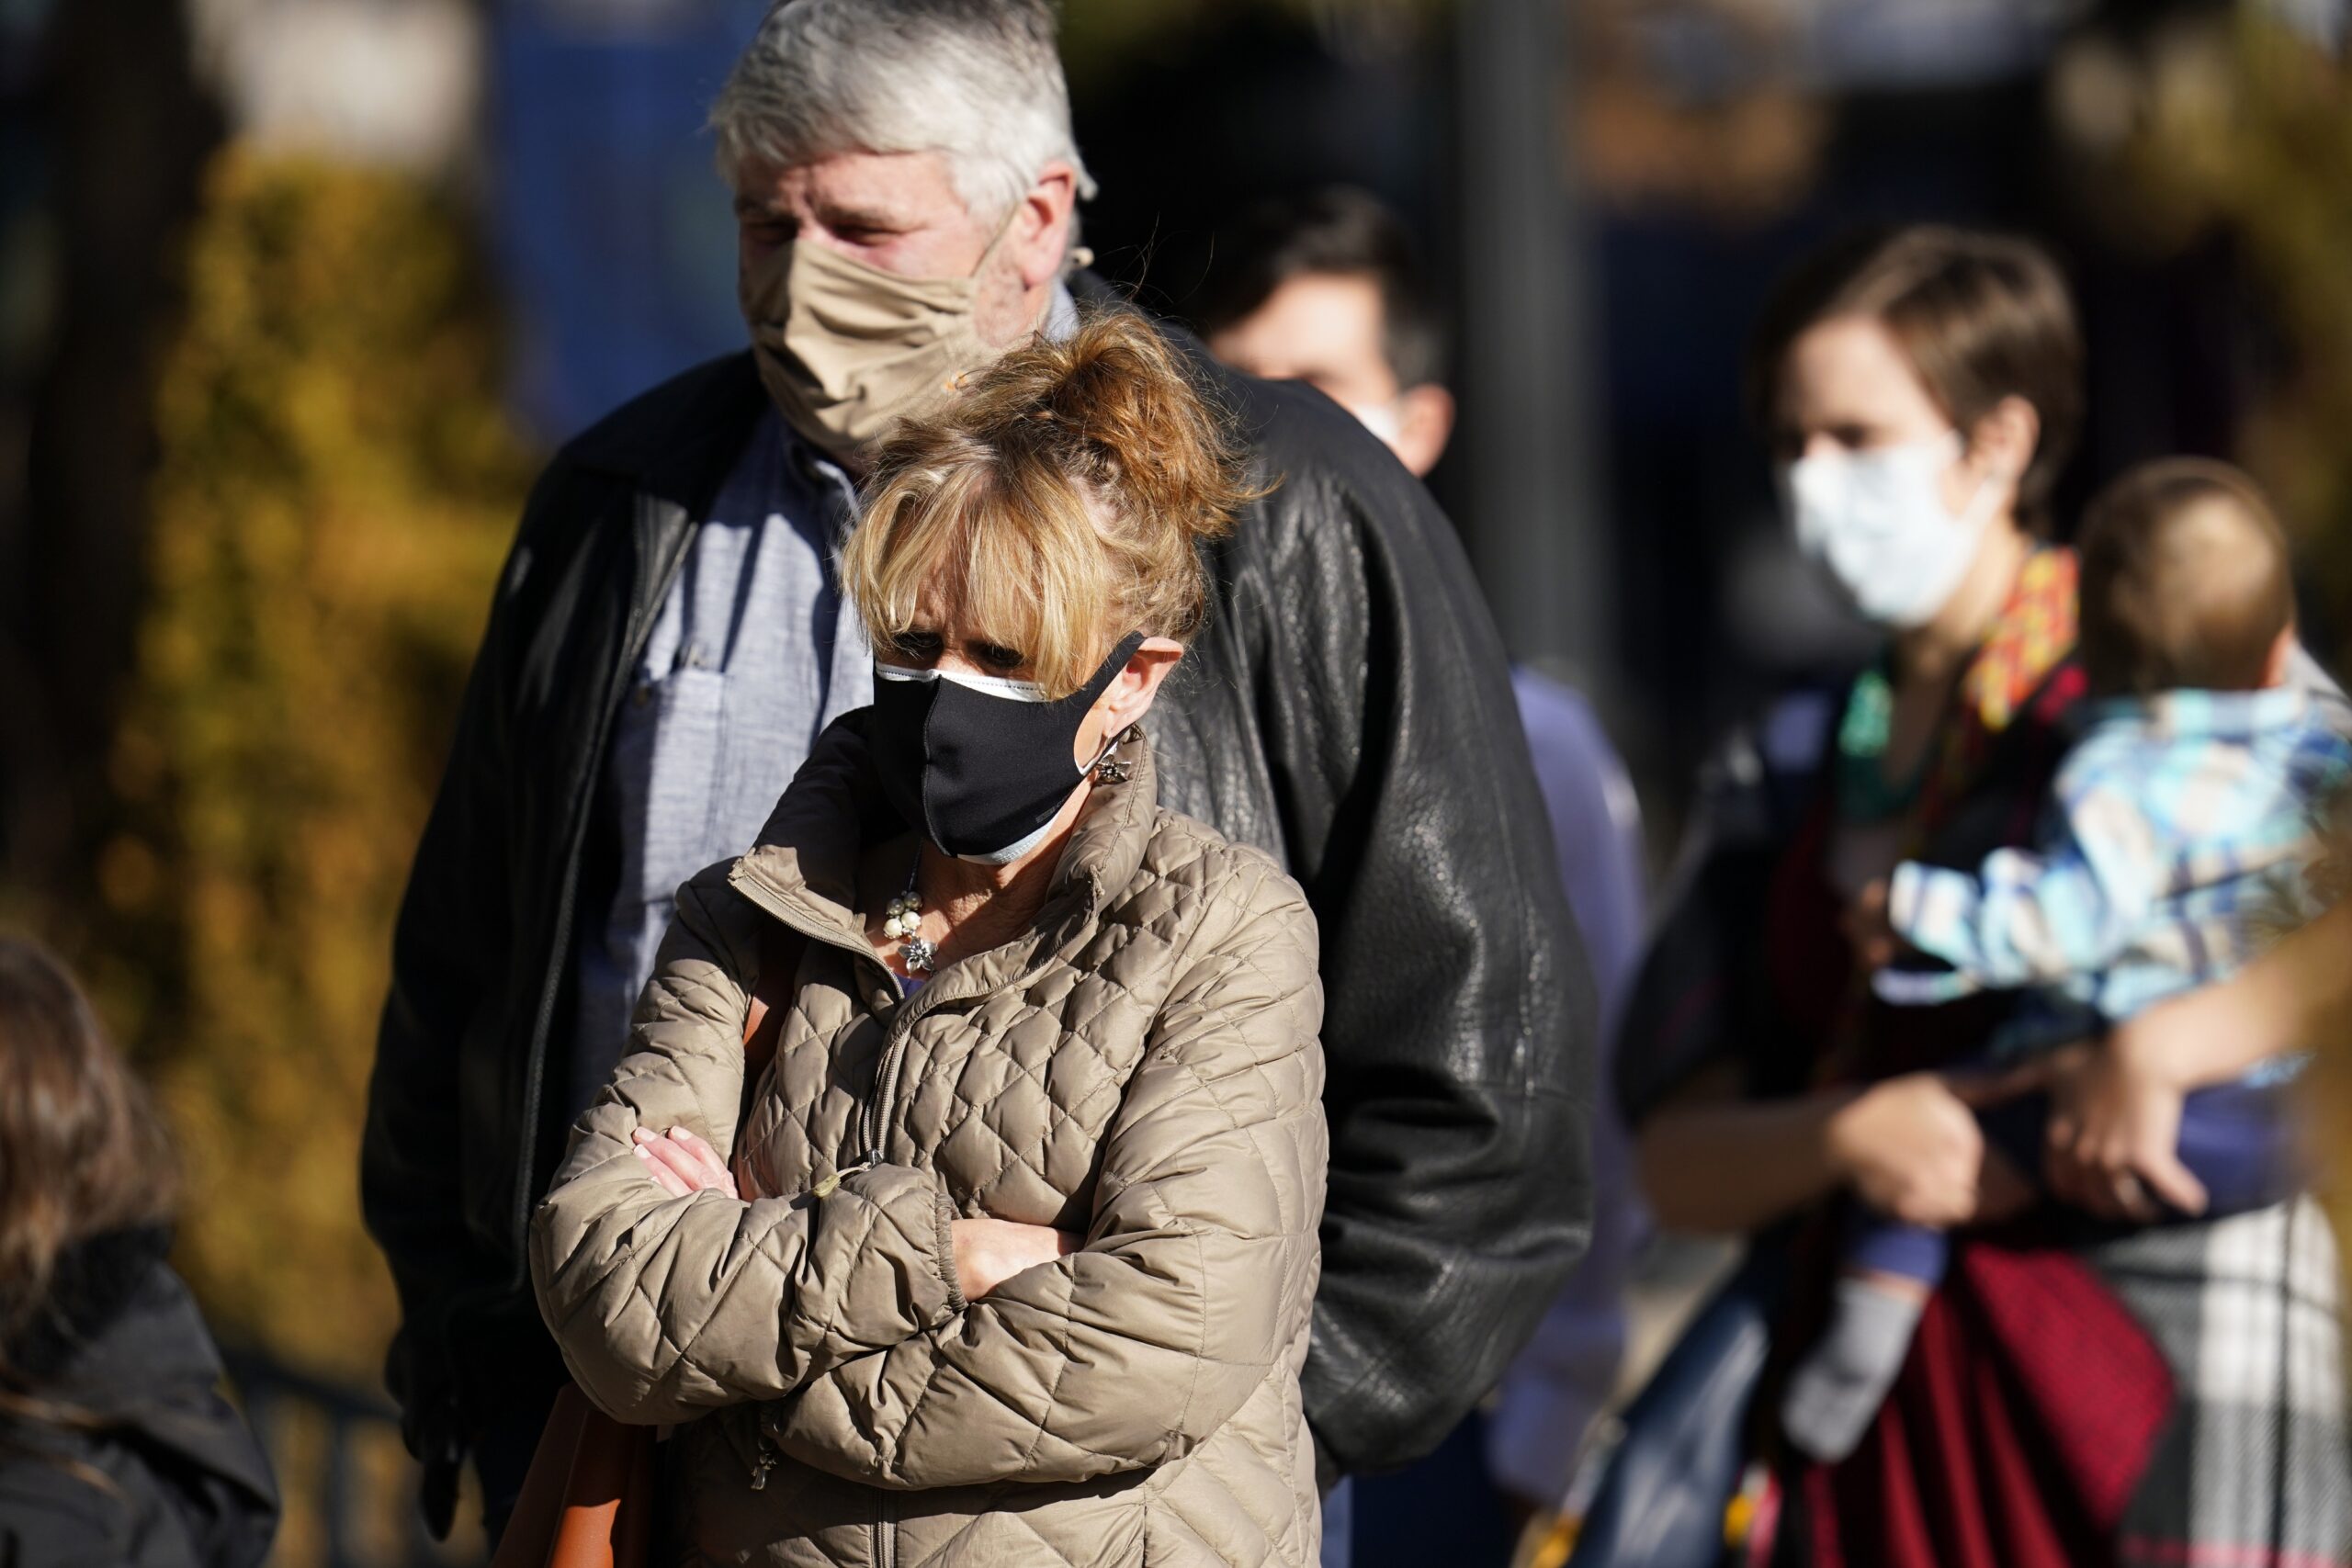 People wearing masks line up outdoors